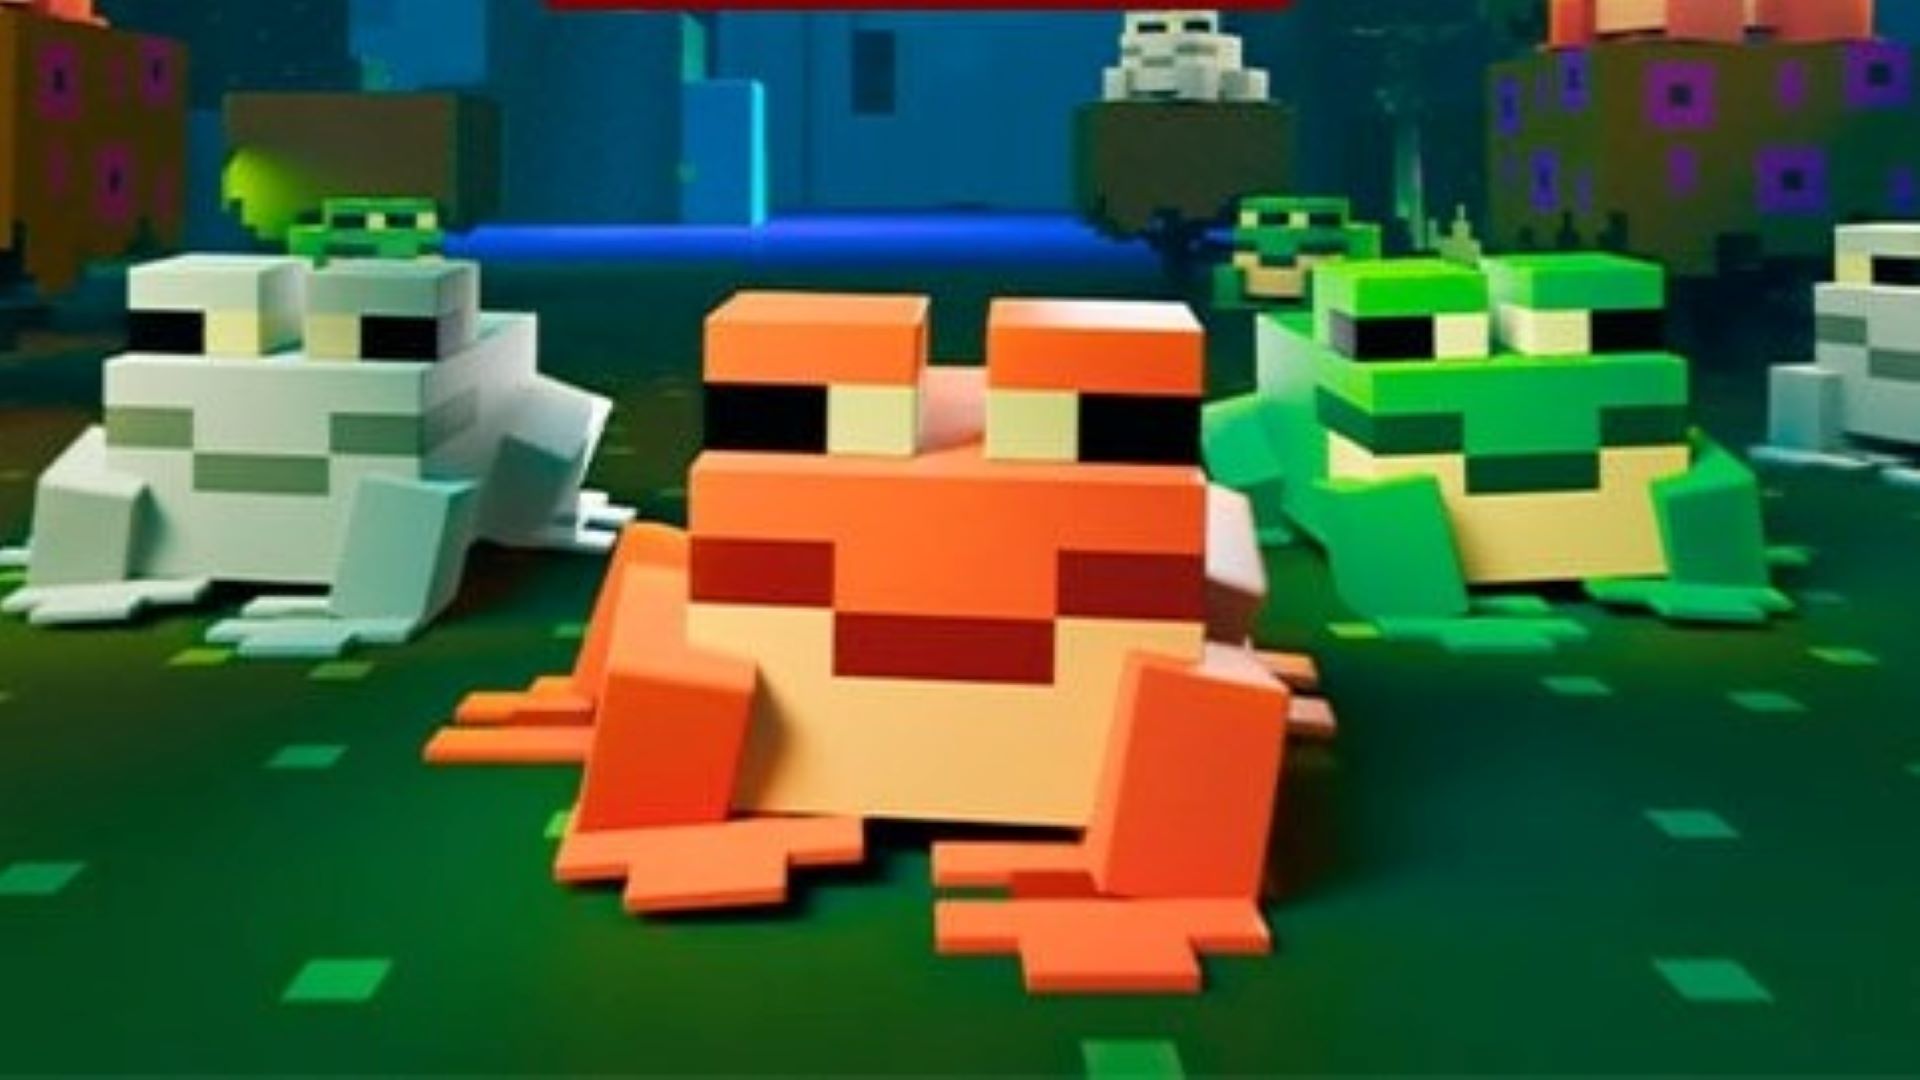 Minecraft Live 2022 Announced With Hilarious Frog Trailer